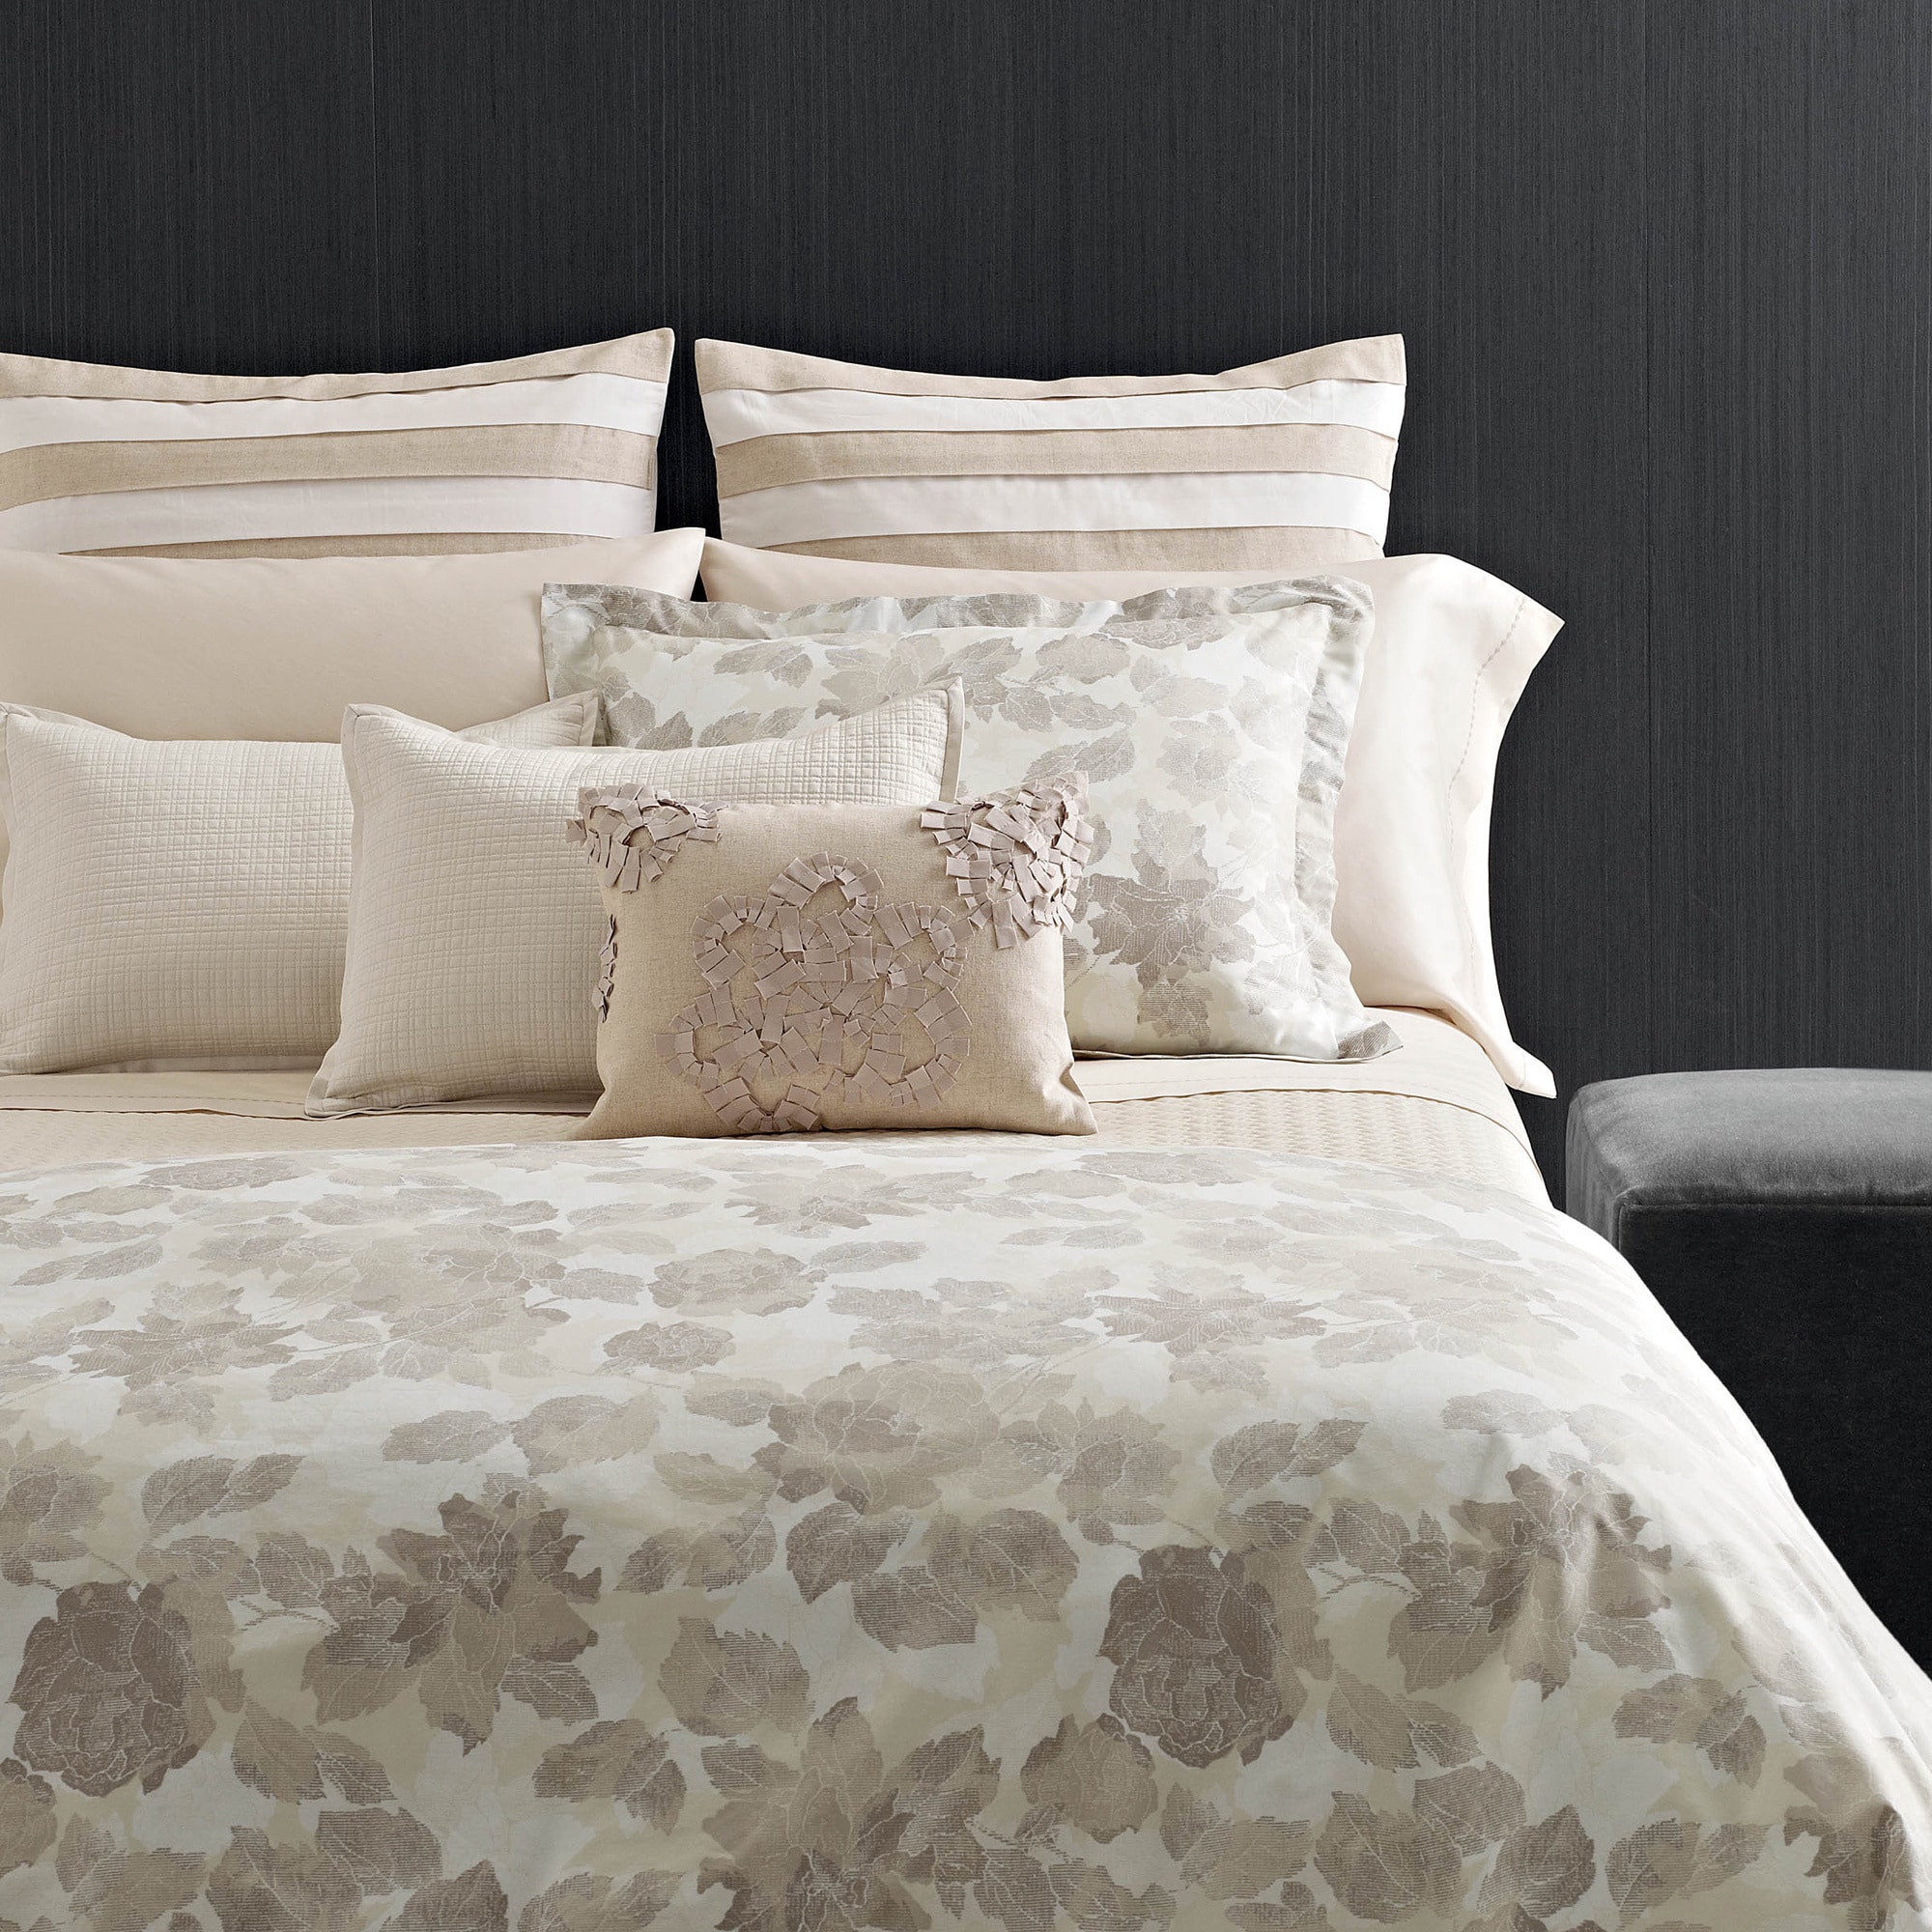 Vera Wang Vera Wang Etched Rose Duvet Cover Set With Sham Separates Off White Size Full  Queen